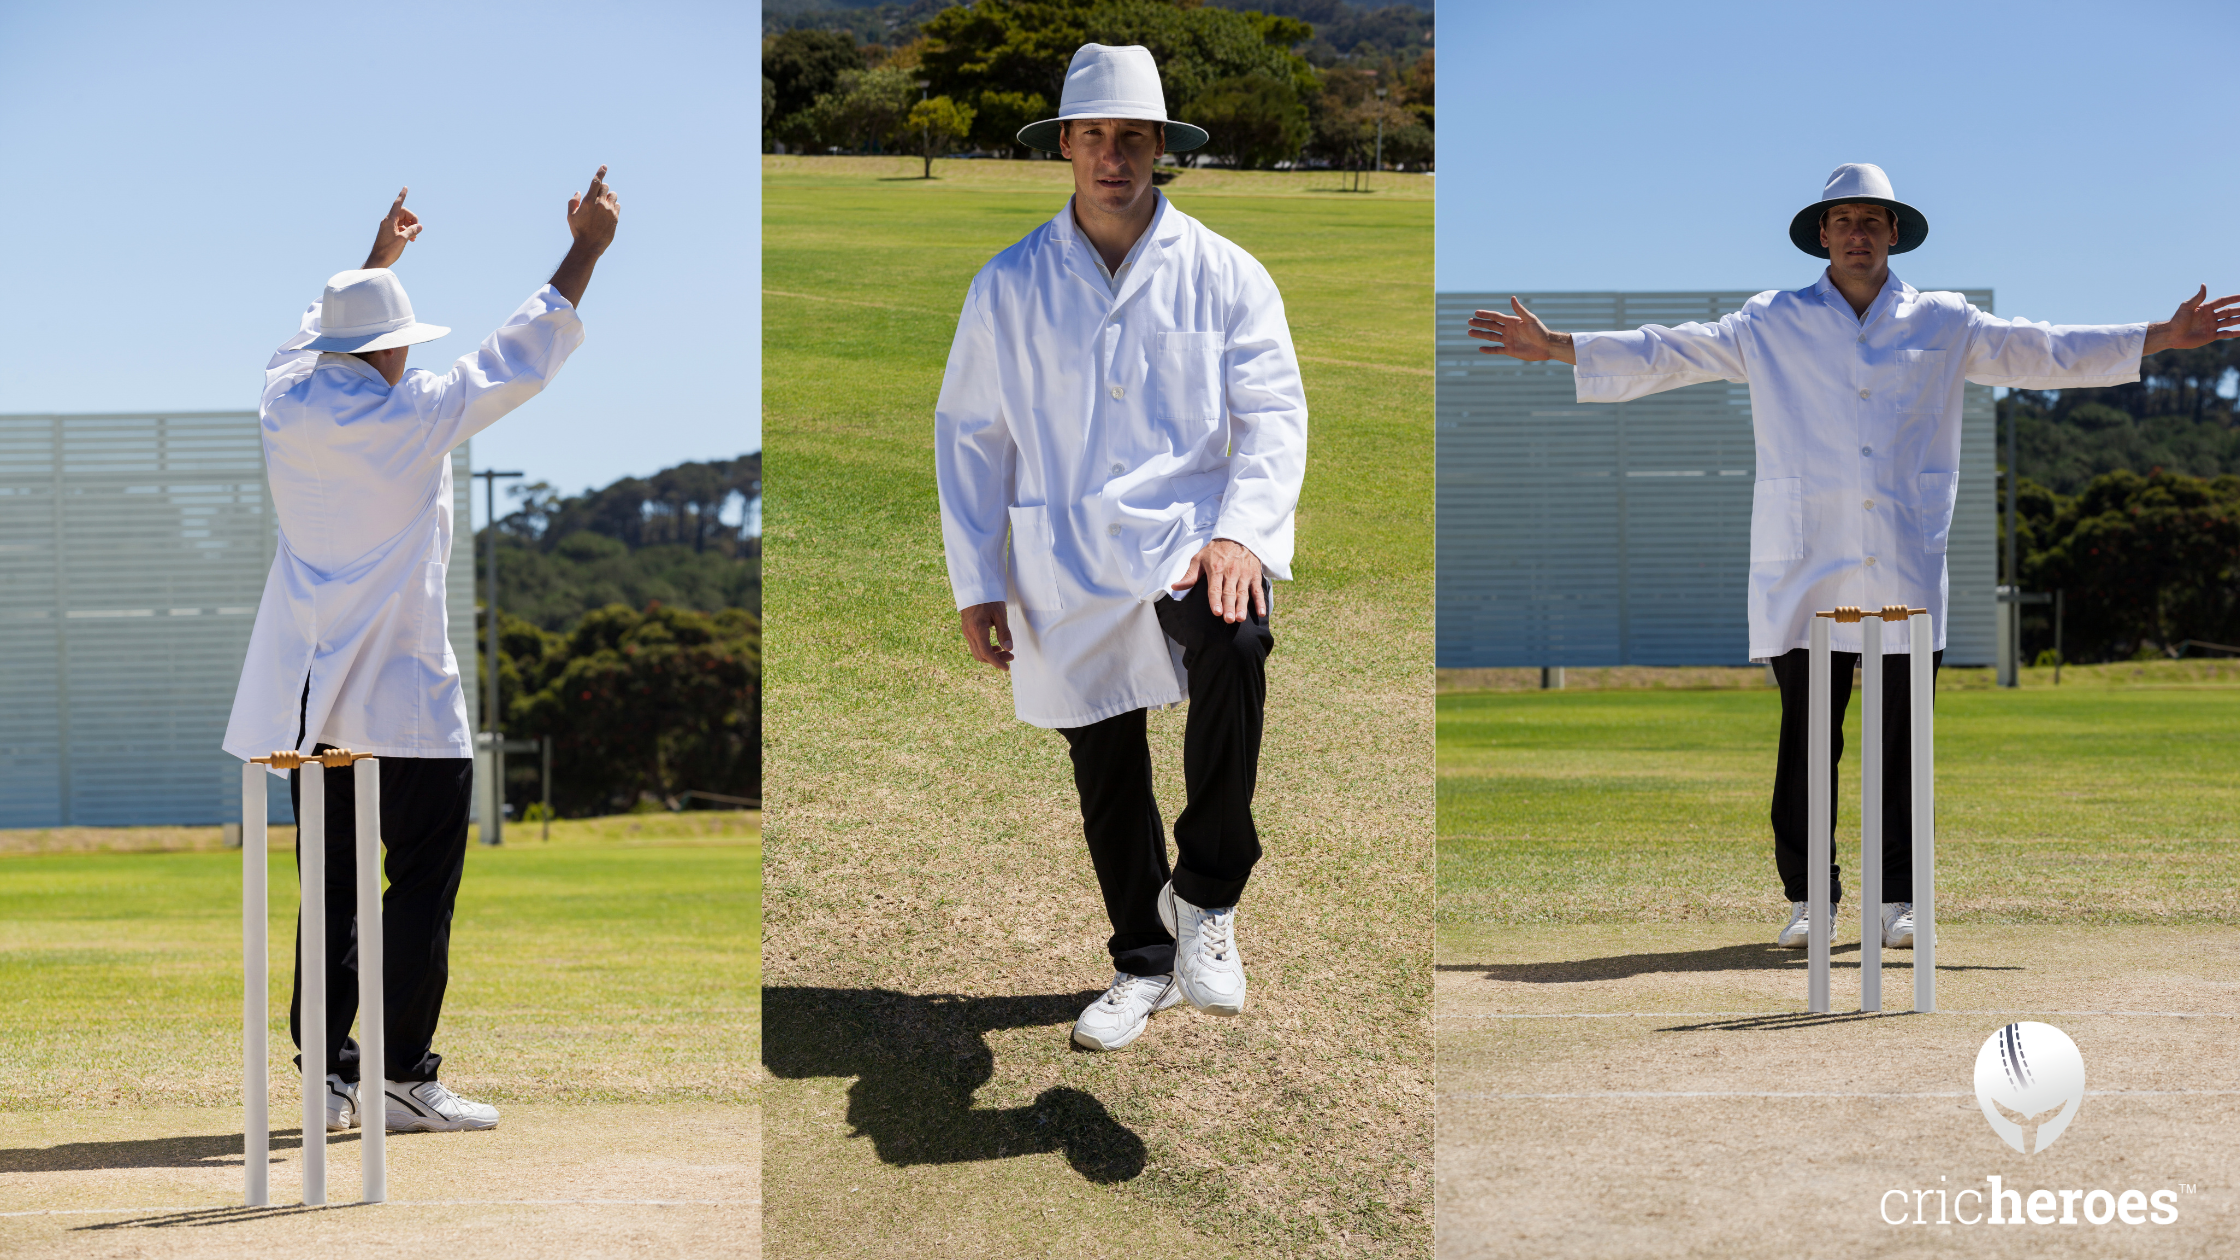 How to Hire Cricket Umpire